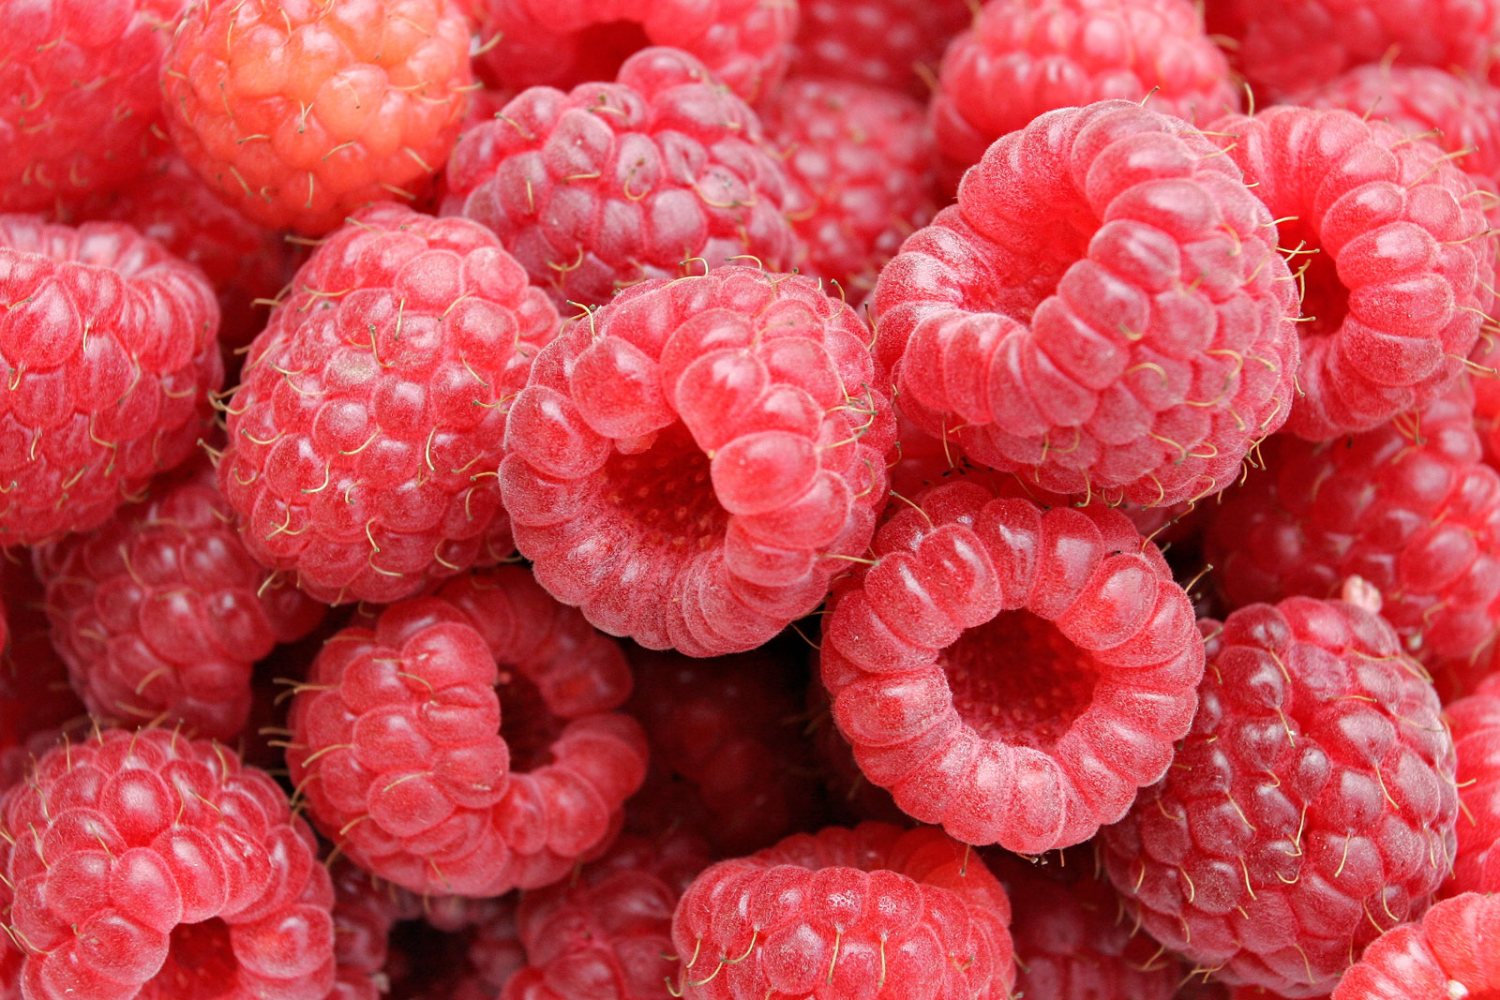 Raspberries are a delicious, hunger quenching fruit that can be used for adding flavor to water and teas.